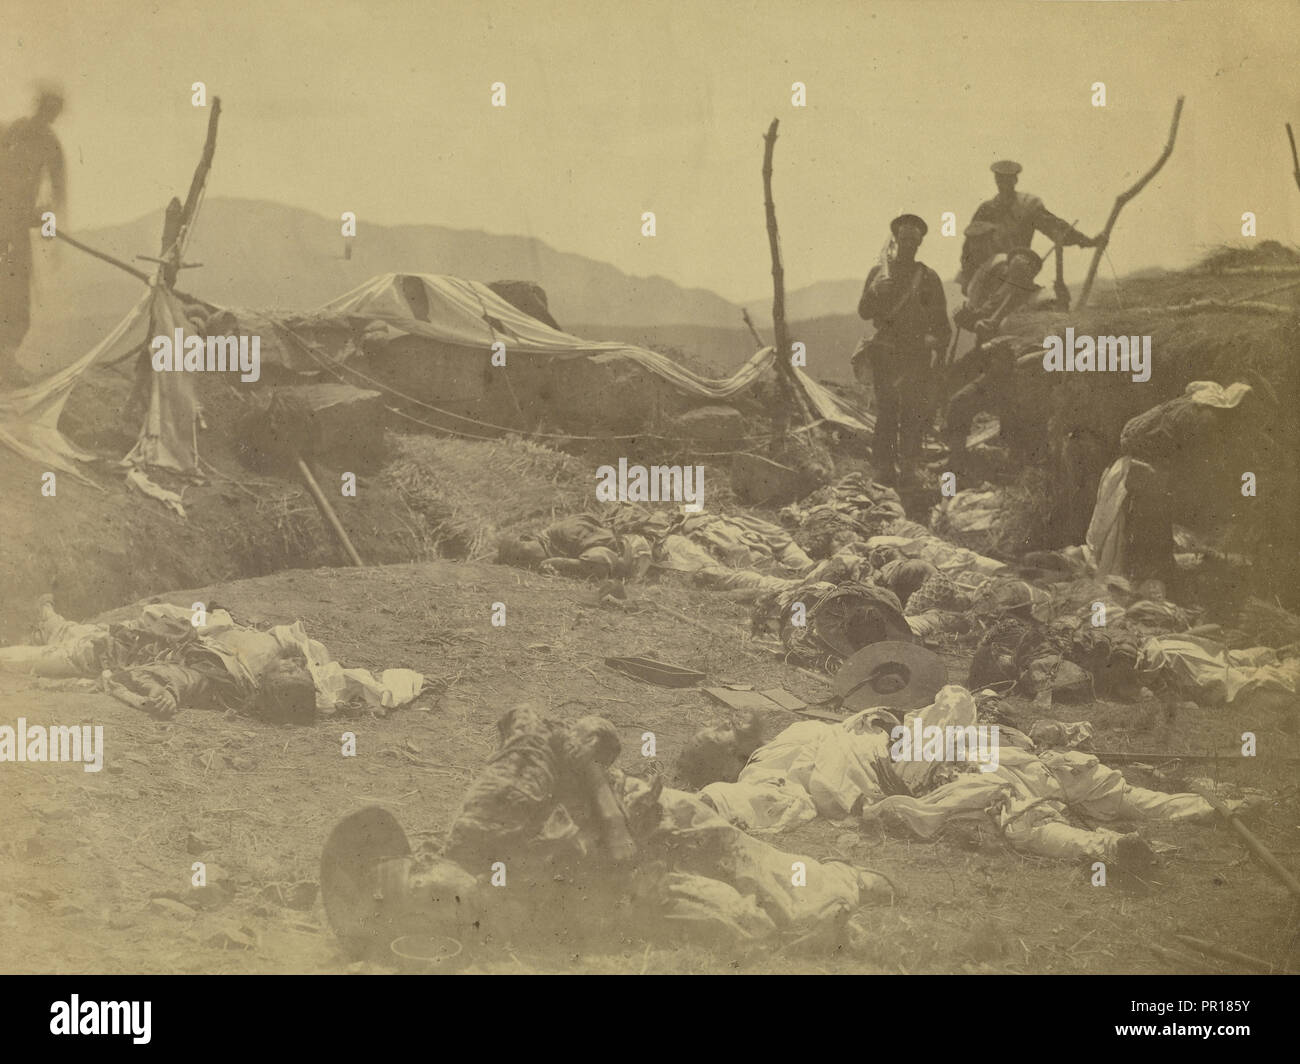 After capture of 2nd Fort Corea - view of dead Coreans. Lt. McKee of Kentucky mortally wounded near this spot; Felice Beato Stock Photo